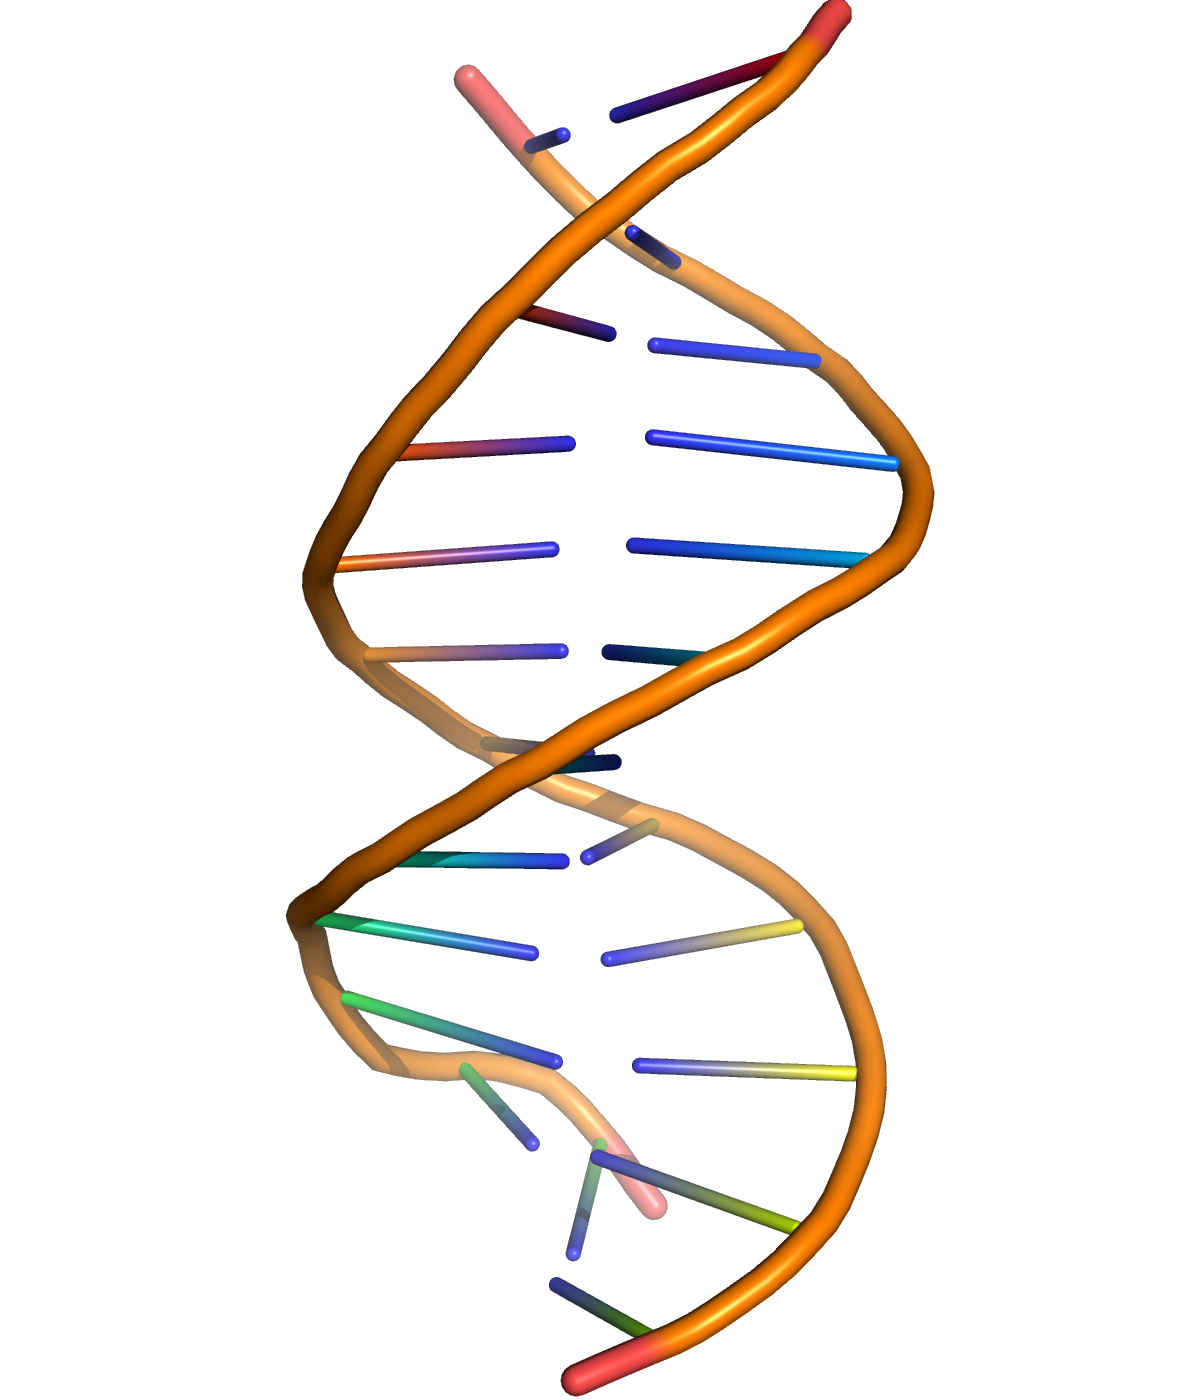 A cartoon representation of DNA based on atomic coordinates of PDB 1BNA, rendered with open source molecular visualization tool PyMol.